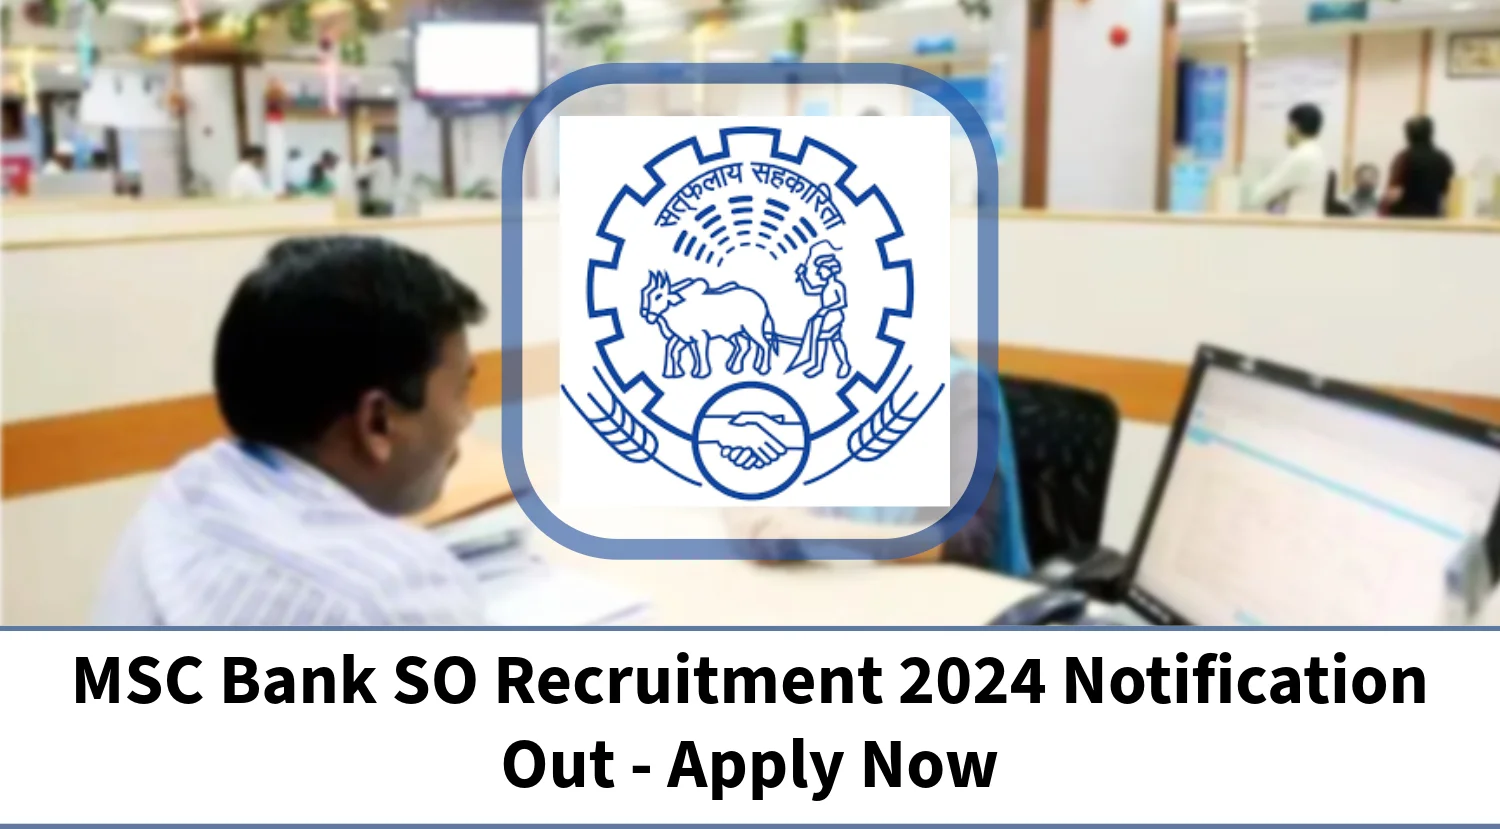 MSC Bank SO Recruitment 2024 Notification Out